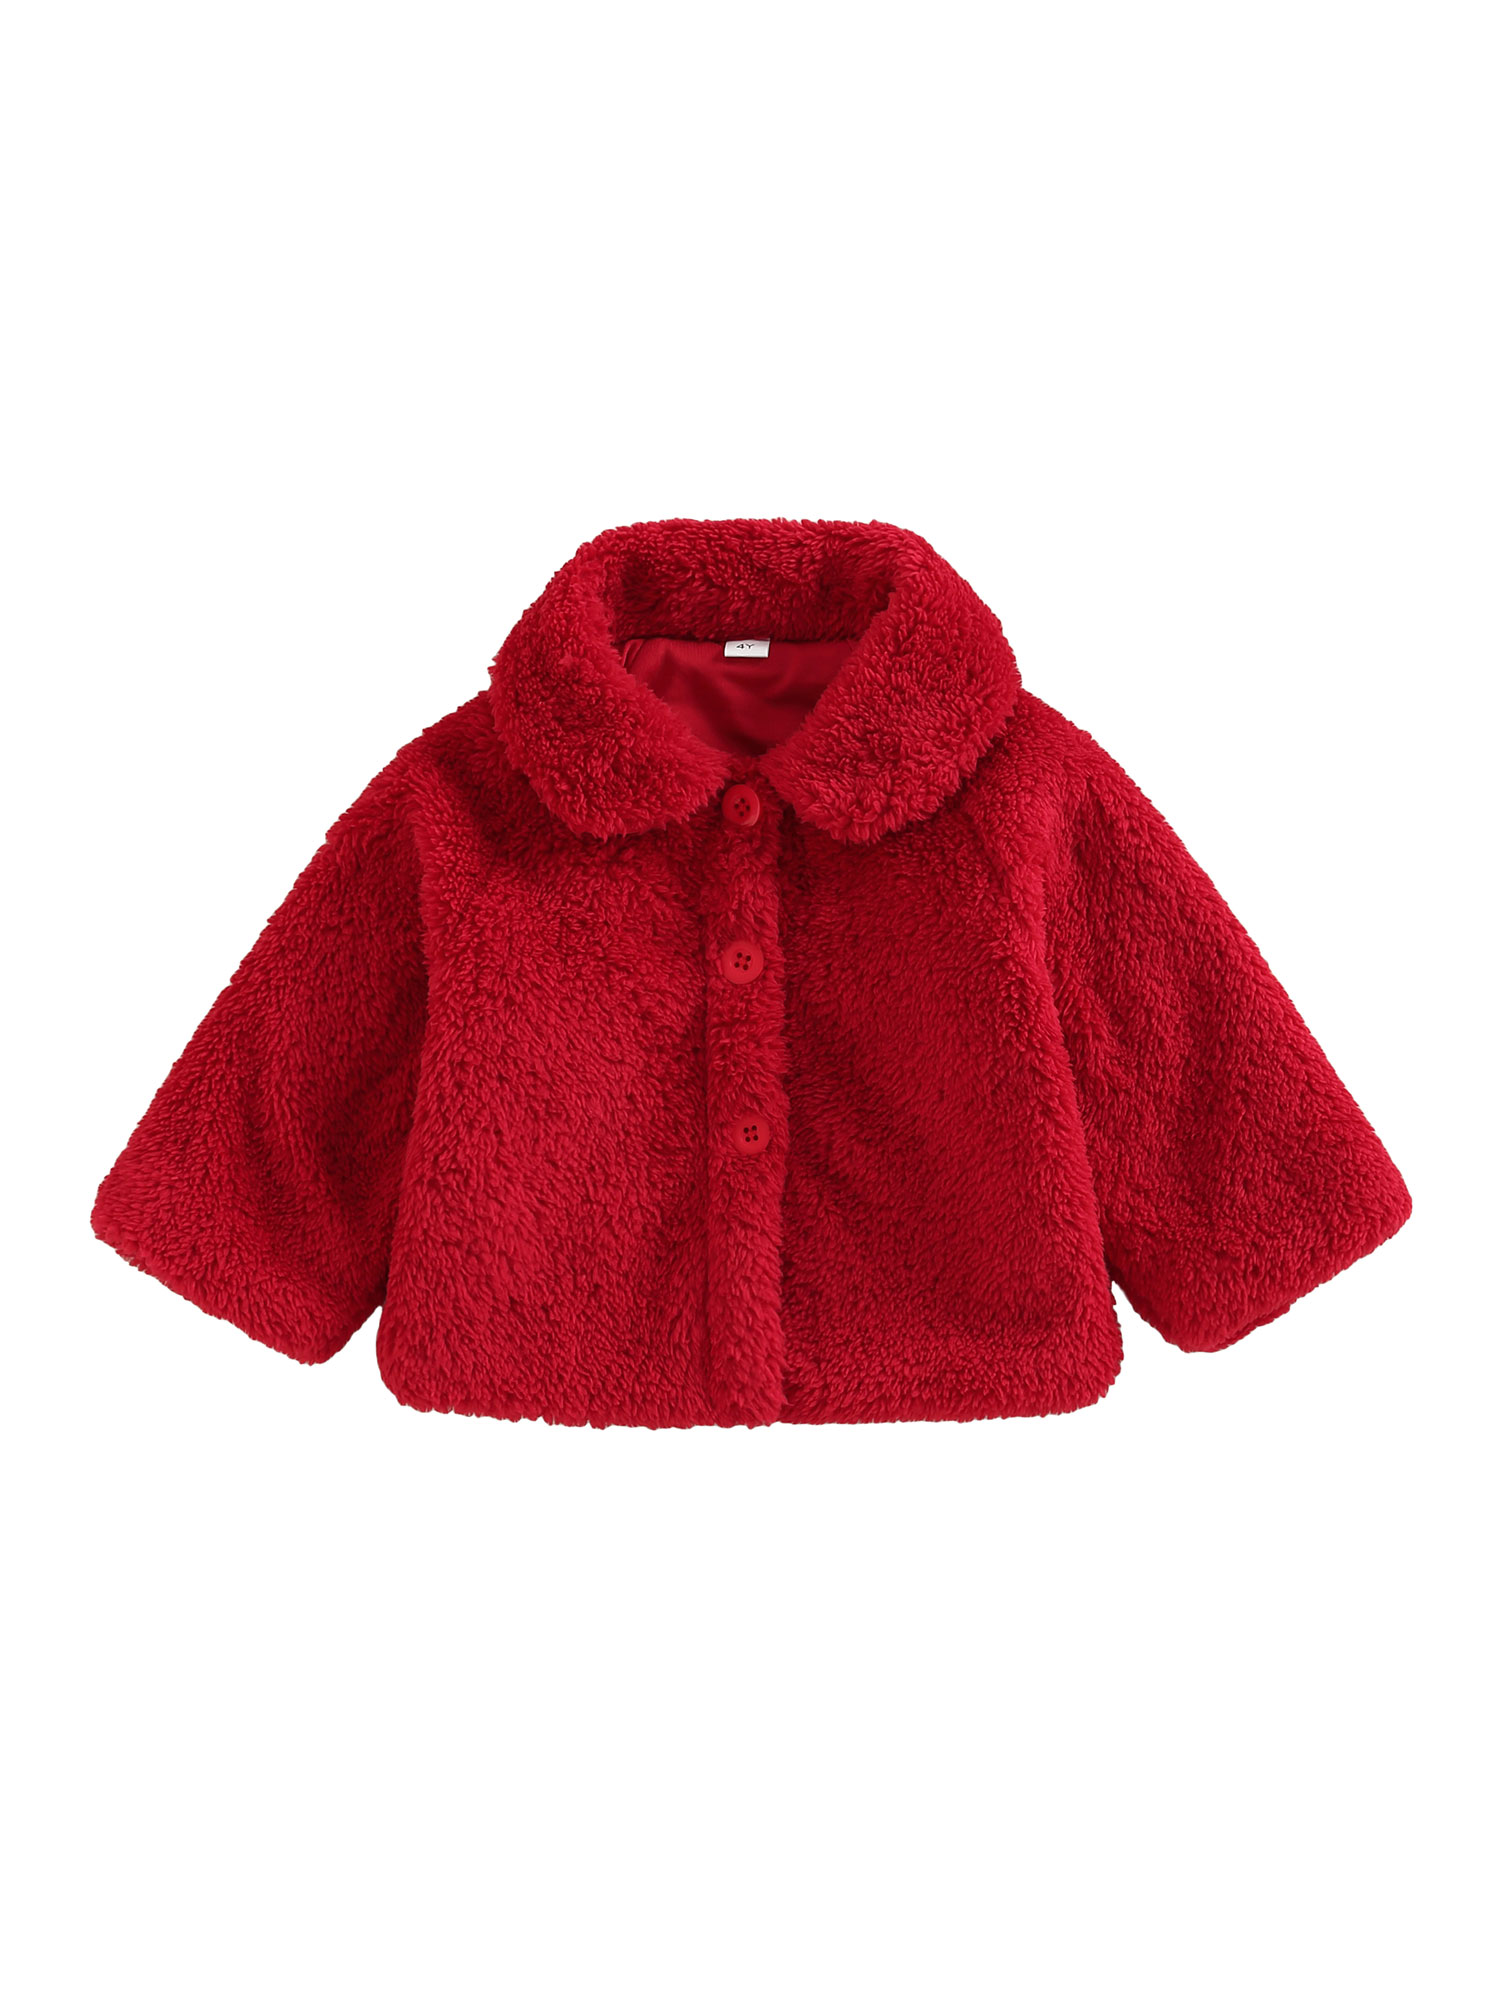 Licupiee Infant Newborn Baby Girl Plush Coat Warm Lapel Long Sleeve Button Down Red Plush Jacket Fall Winter Outwear - image 1 of 6